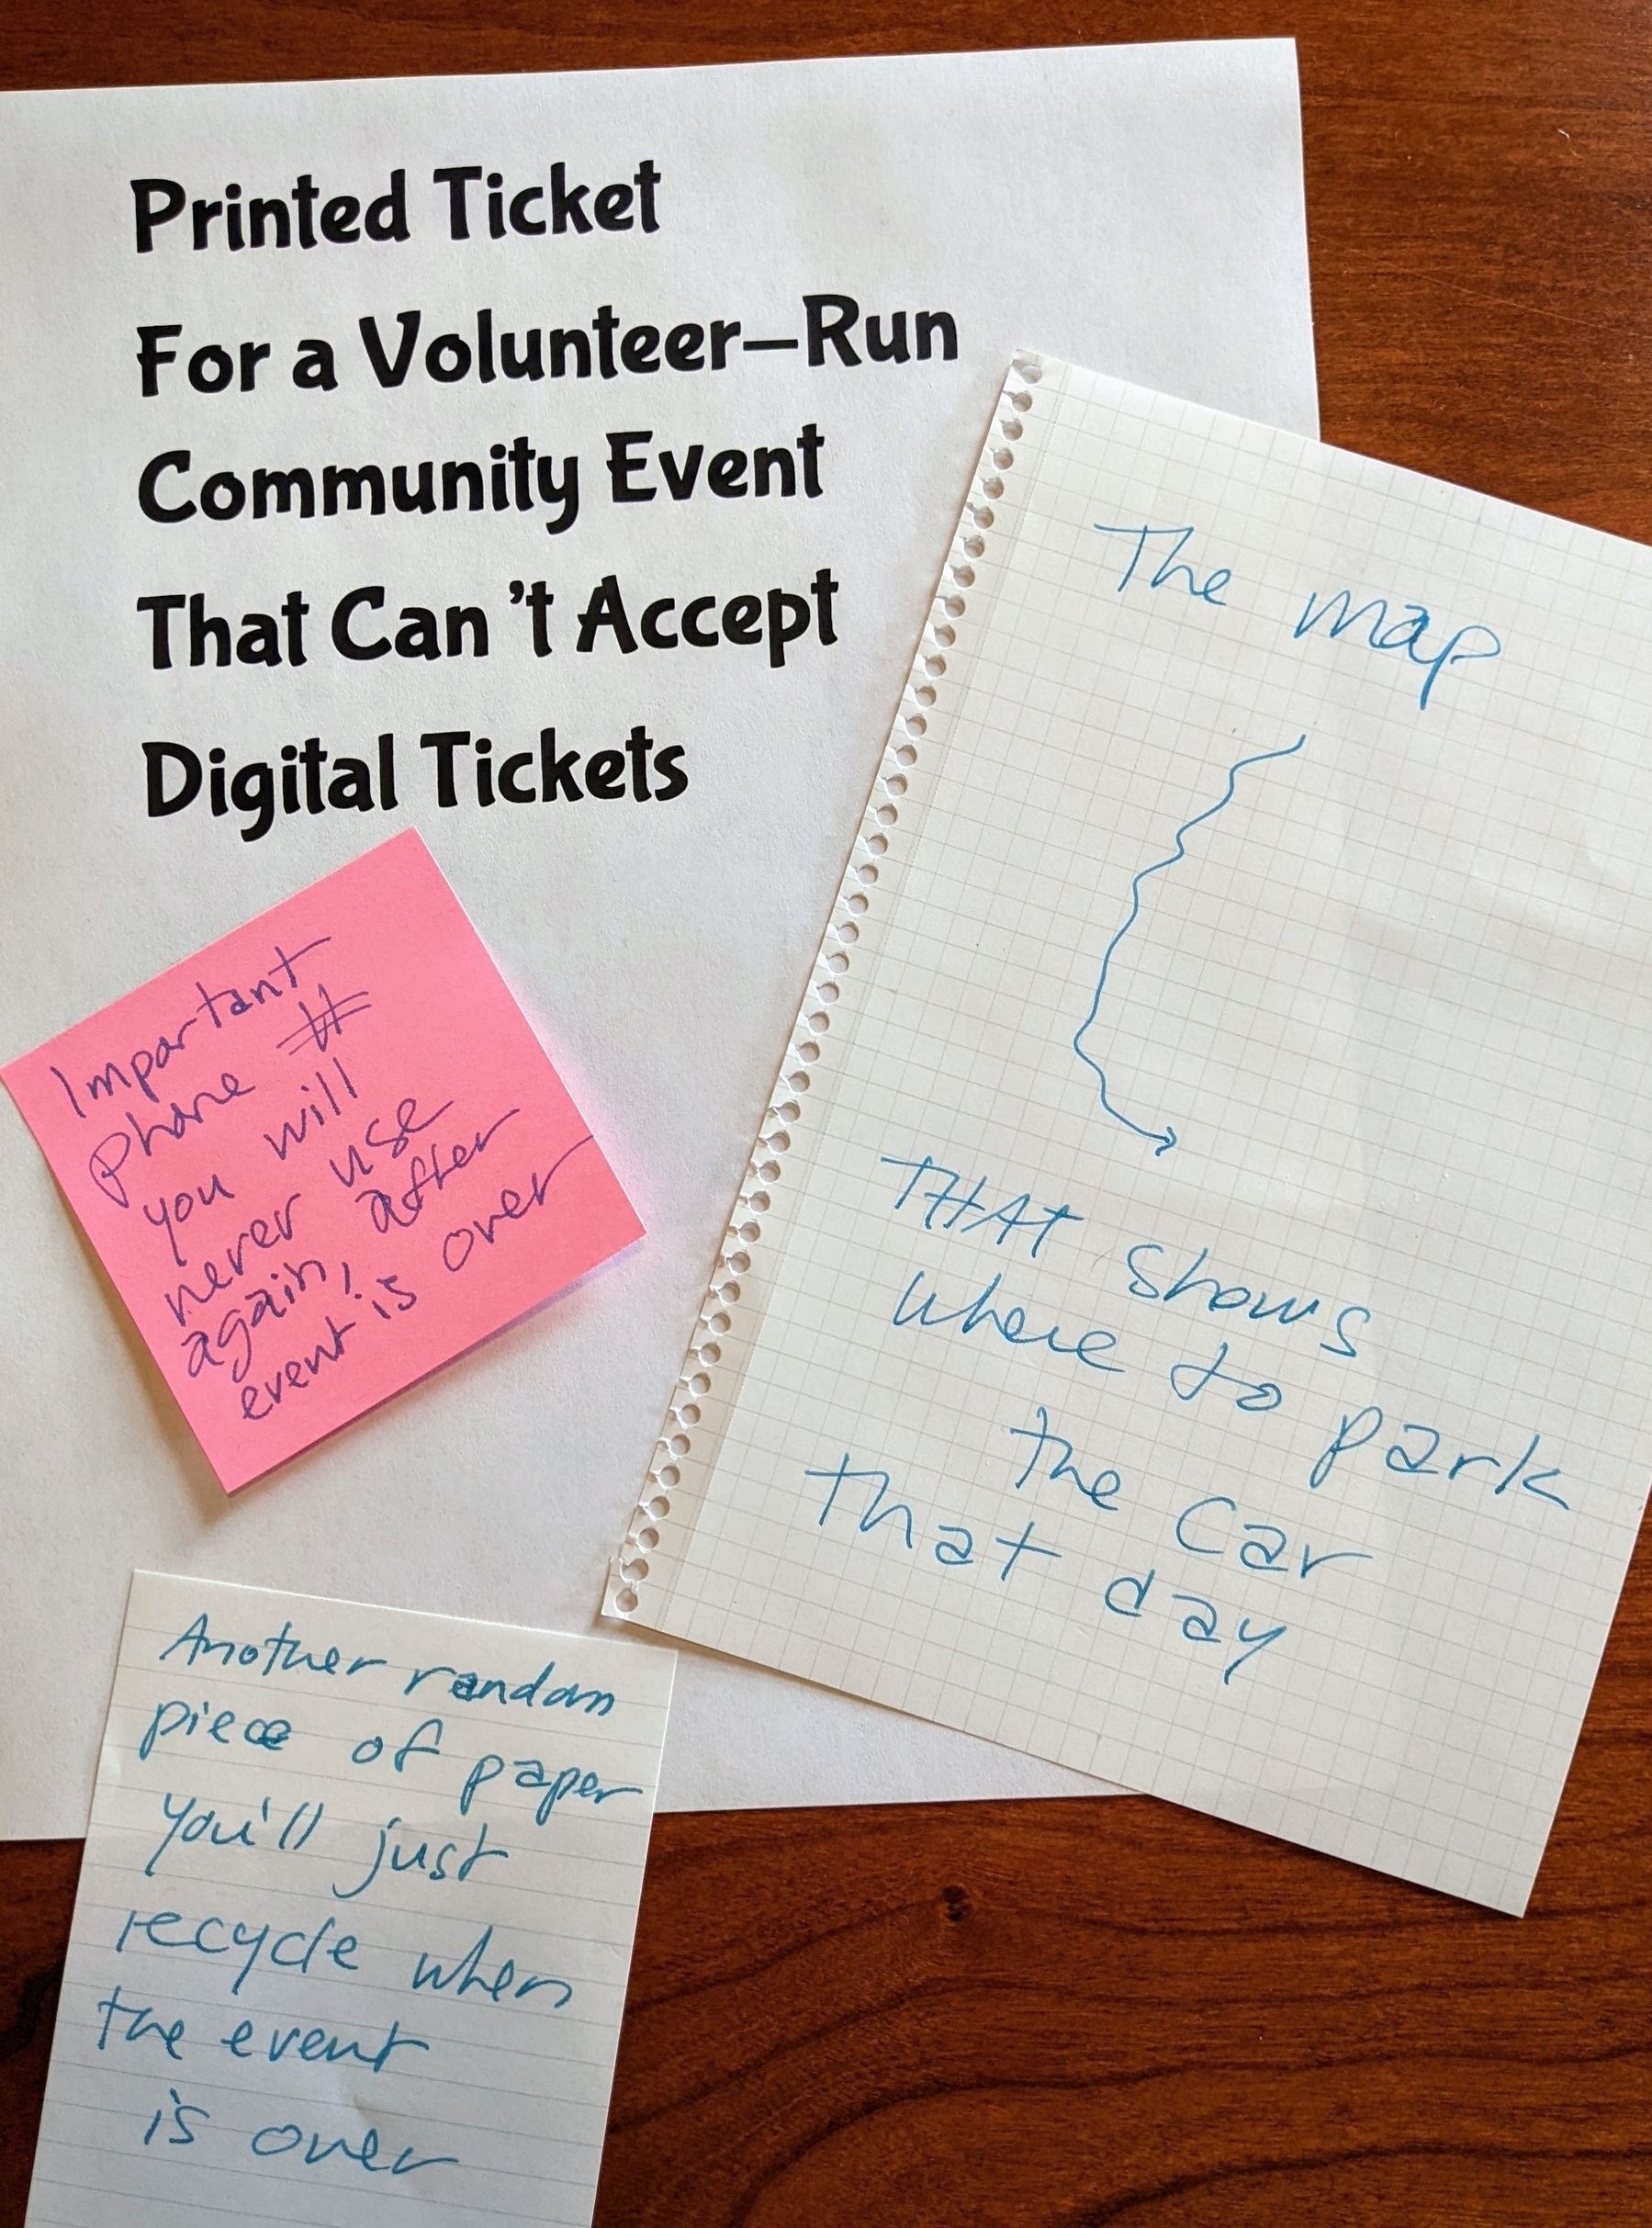 a pile of variously sized papers related to an event including a ticket, a post-it note with a telephone number, a map, and a handwritten note